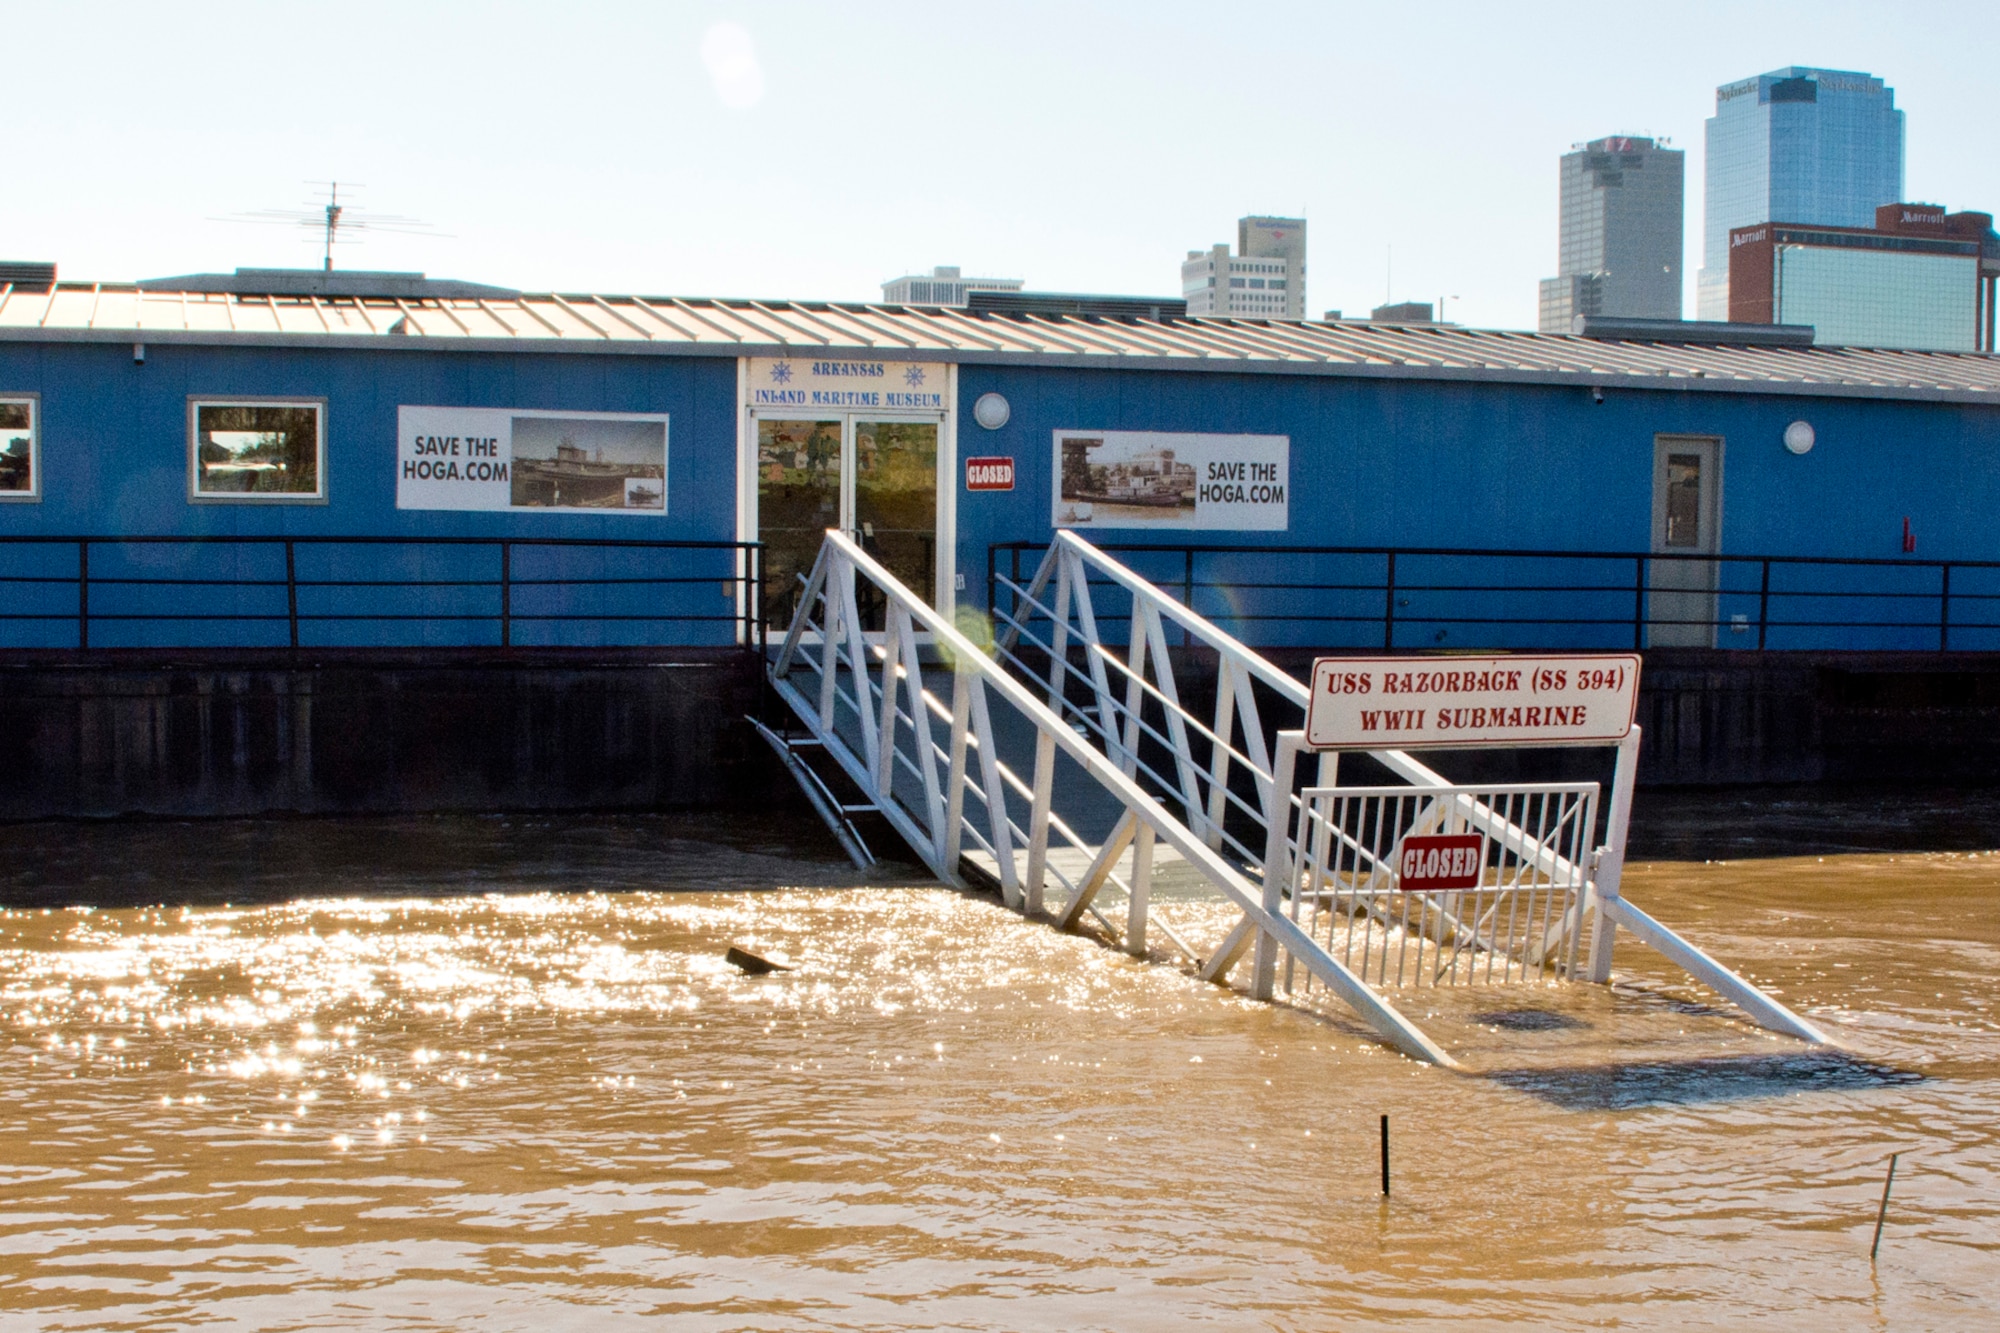 The Arkansas Inland Maritime Museum’s main entrance is underwater due to flooding from the Arkansas River in North Little Rock, Ark., Jan. 3, 2016. The floating museum, as well as its main attractions, the USS Razorback (SS-394) and the USS Hoga (YT-146) did not sustain major damage during the recent flooding of the Arkansas River. Recent flooding in Arkansas could set records, and everyone is encouraged to stay off the rivers, which include the Arkansas, Buffalo and White rivers until further notice. (Courtesy photo by Jeff Walston)